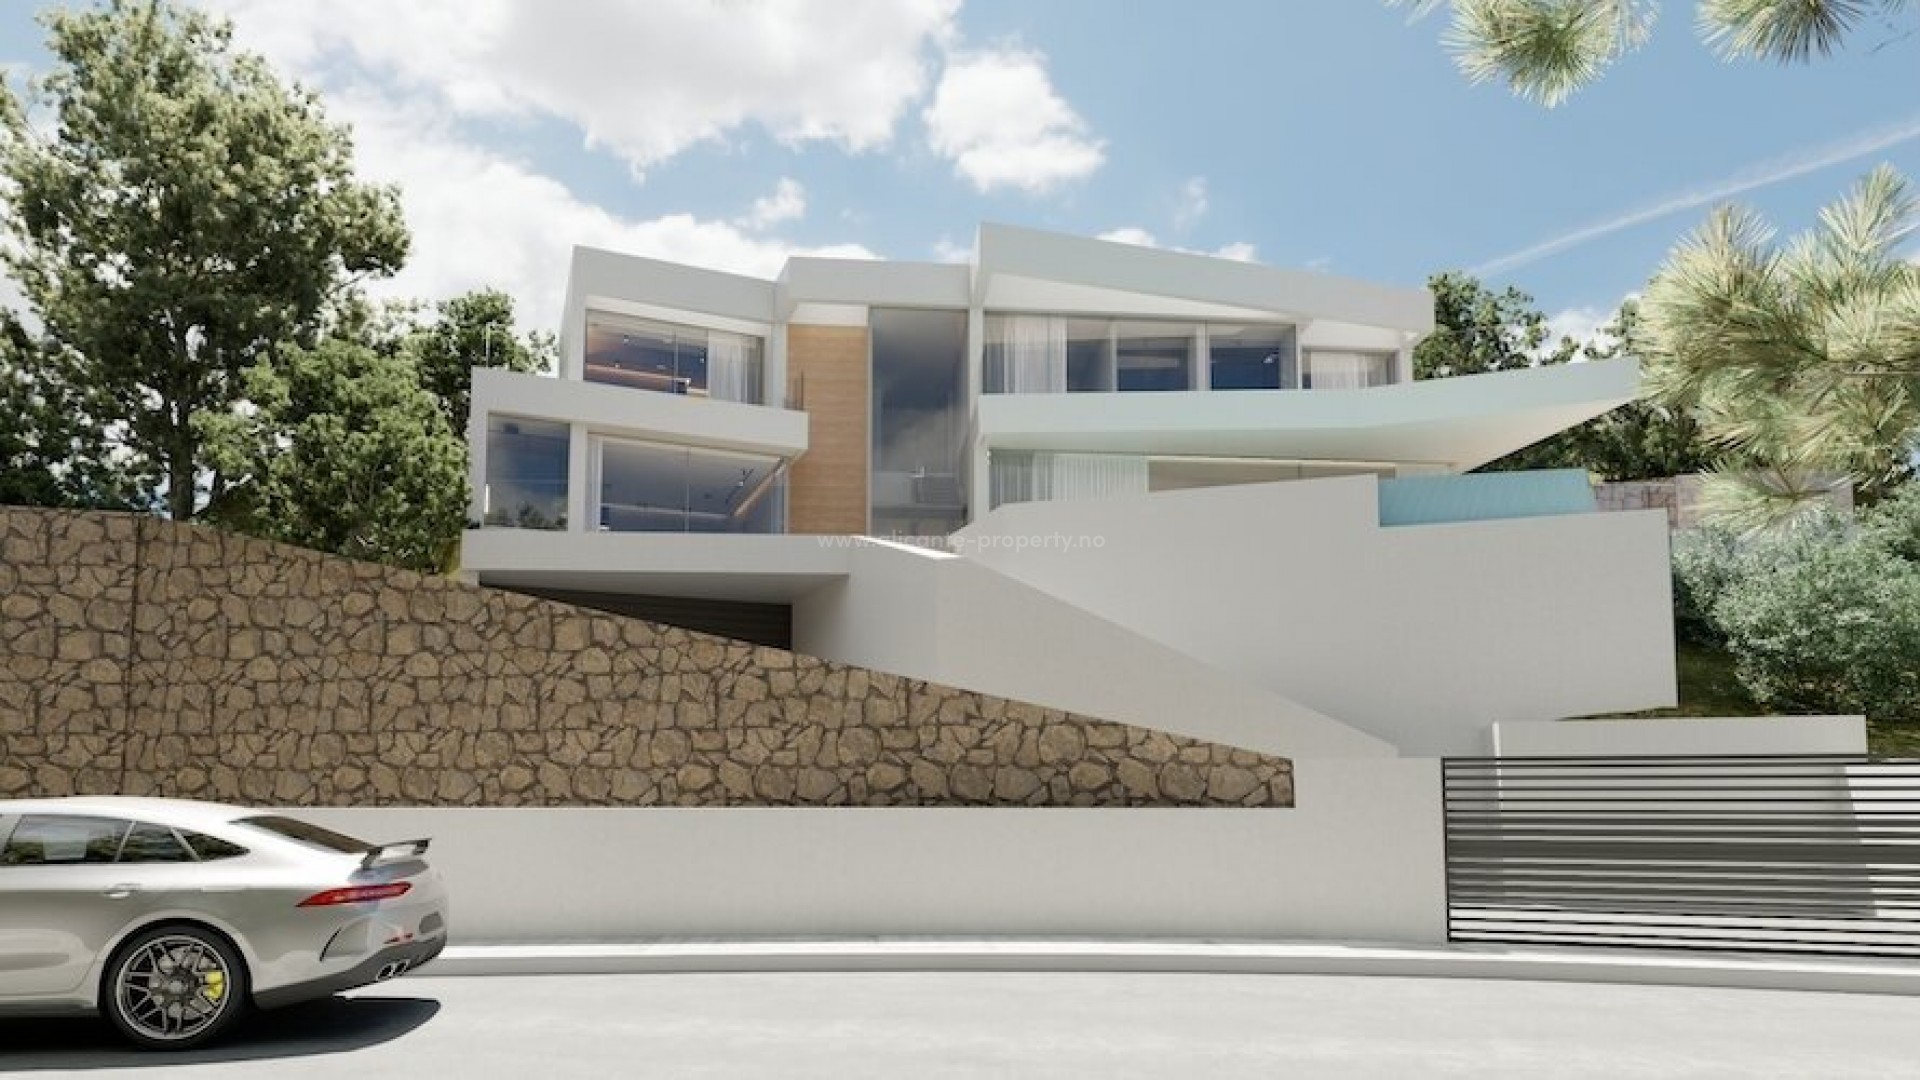 100% private luxury villa in Altea Hills w/panoramic sea view, 3 floors 3 bedrooms, 3 bathrooms + guest toilet, landscaped with bbq, garage for two cars